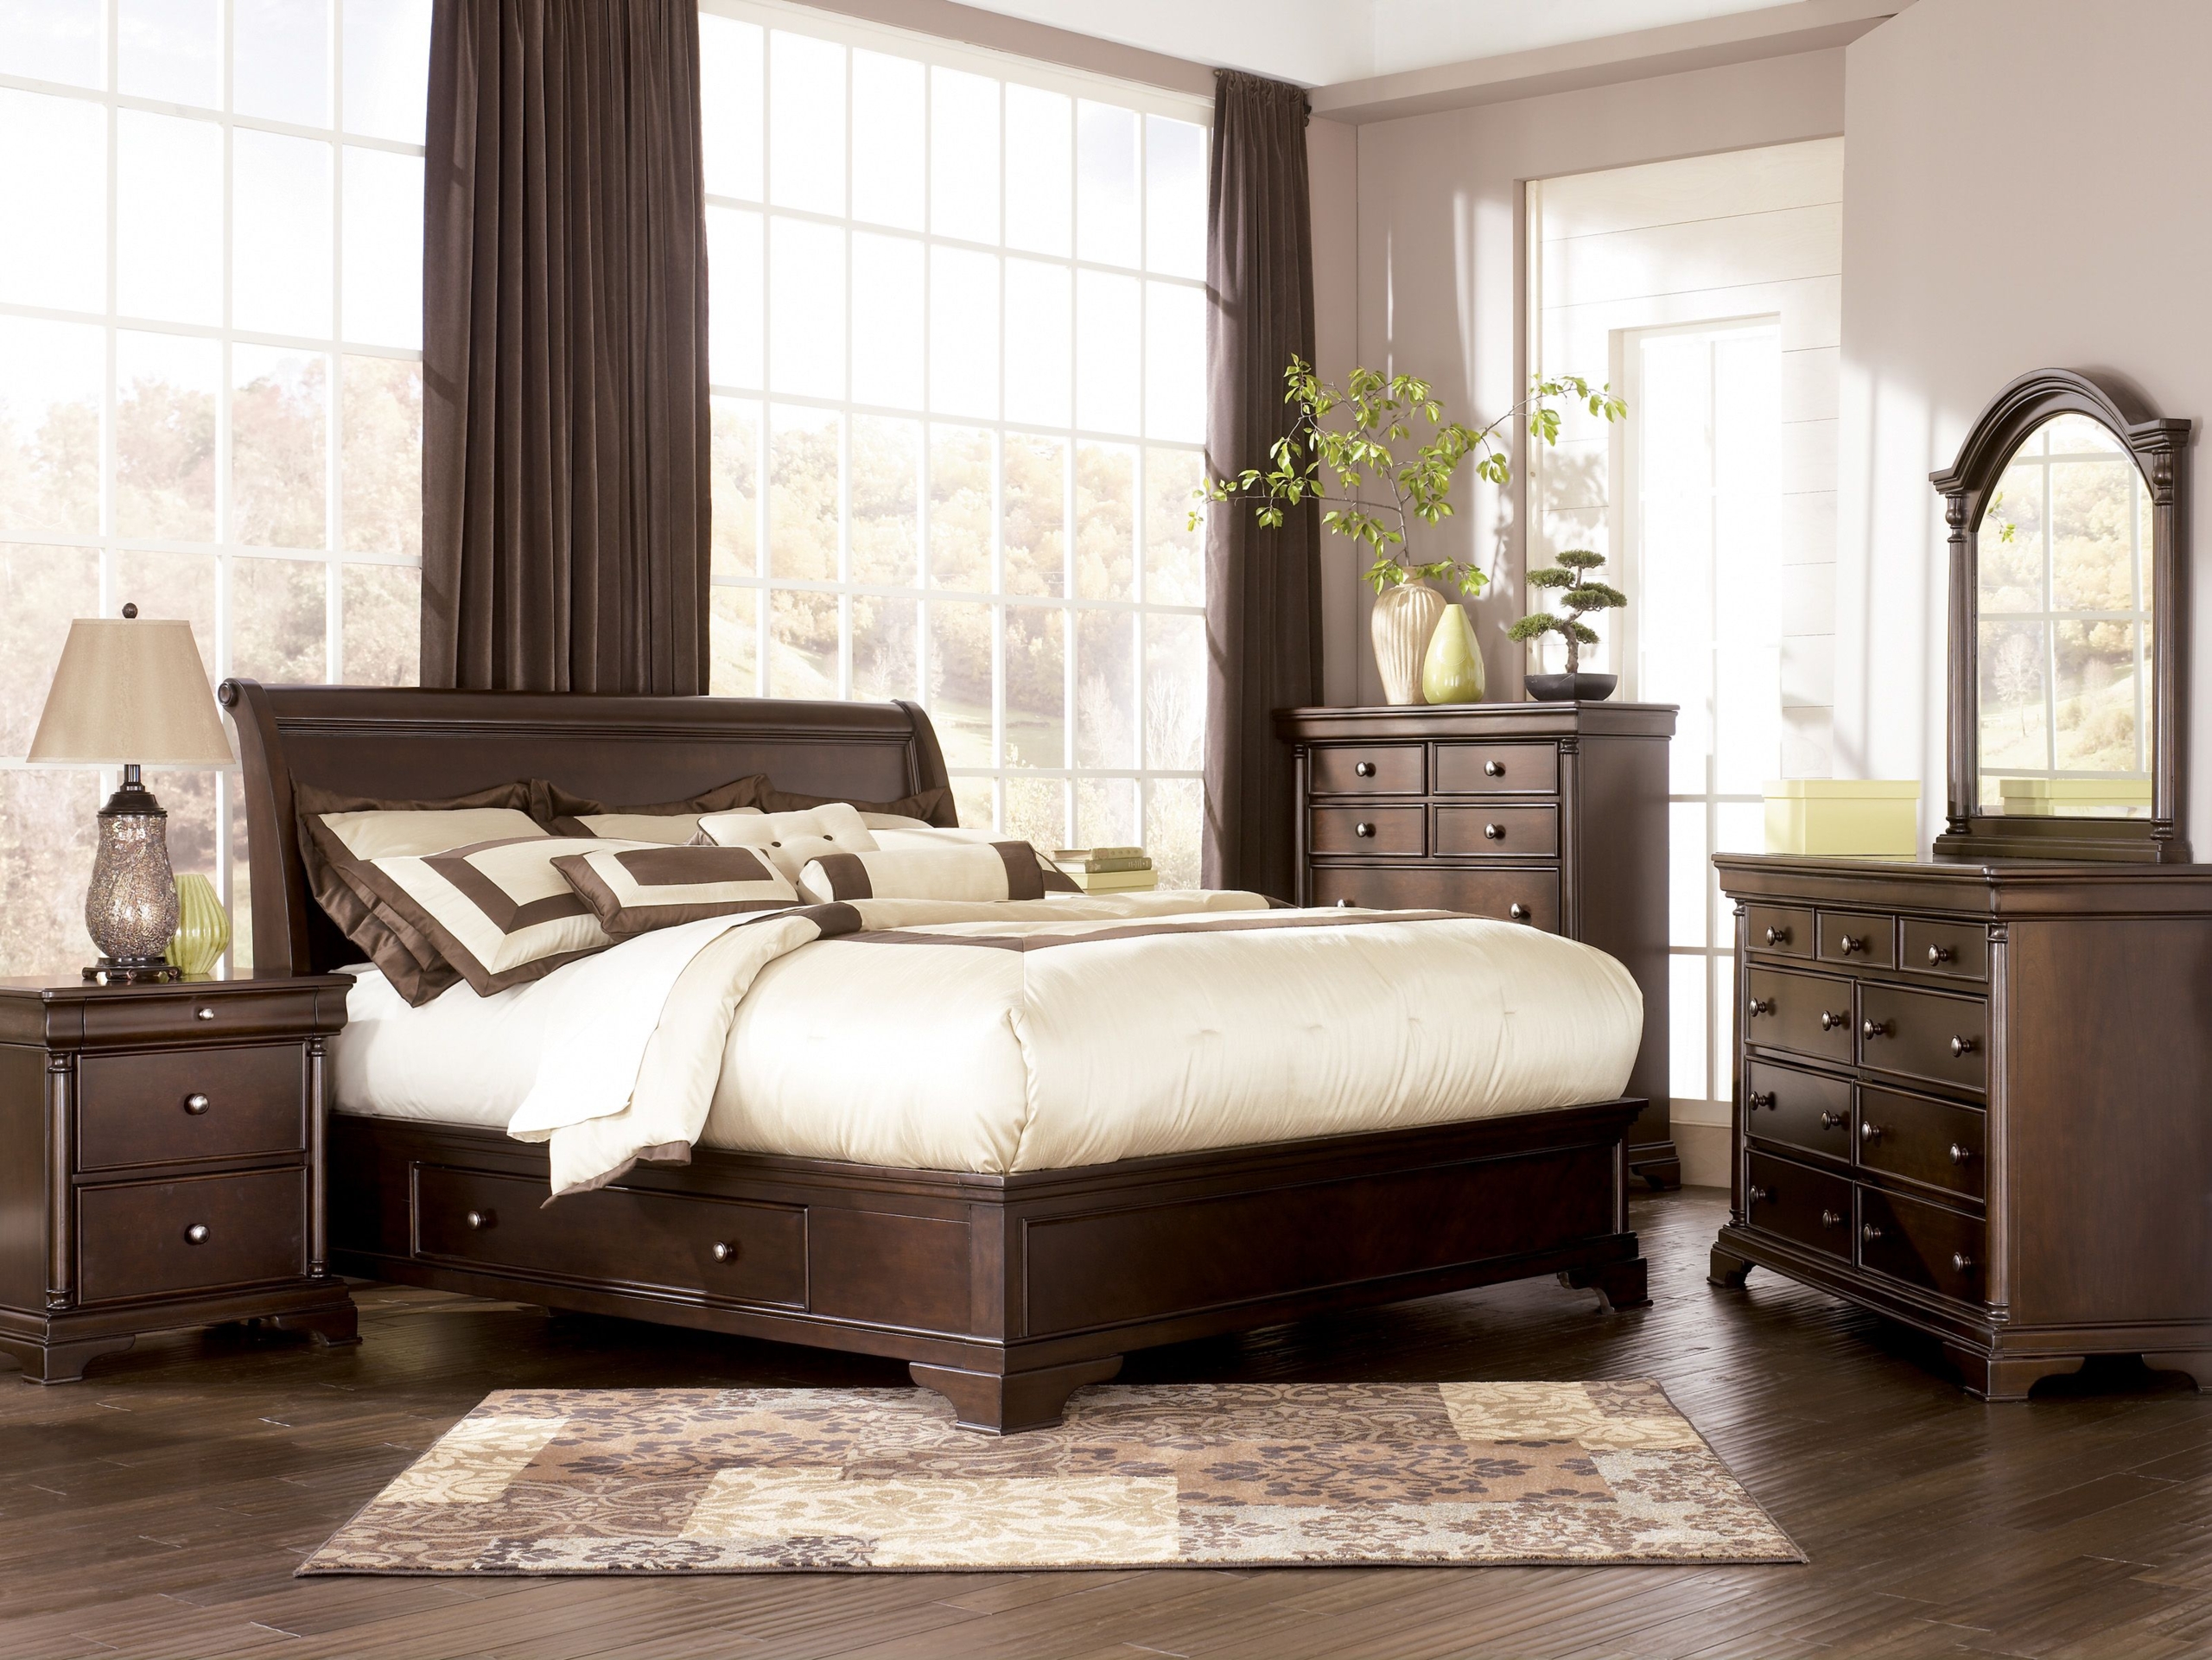 Bedroom ideas with cherry wood furniture